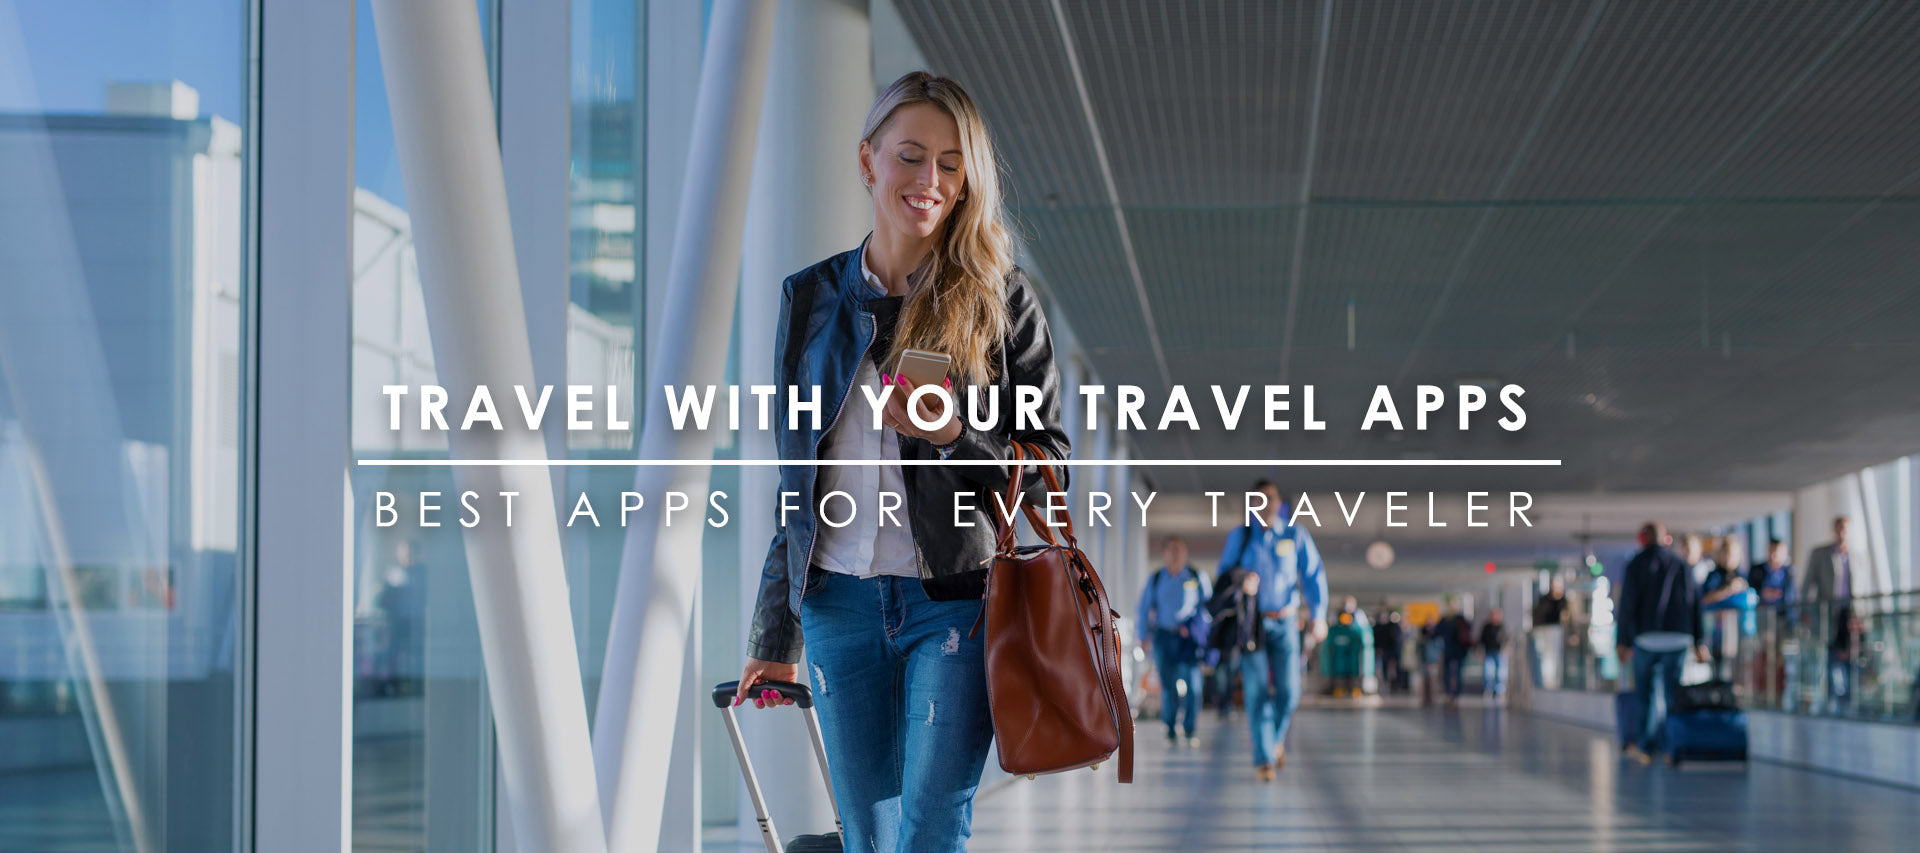 11 Best Travel Apps Every Traveler Should Have